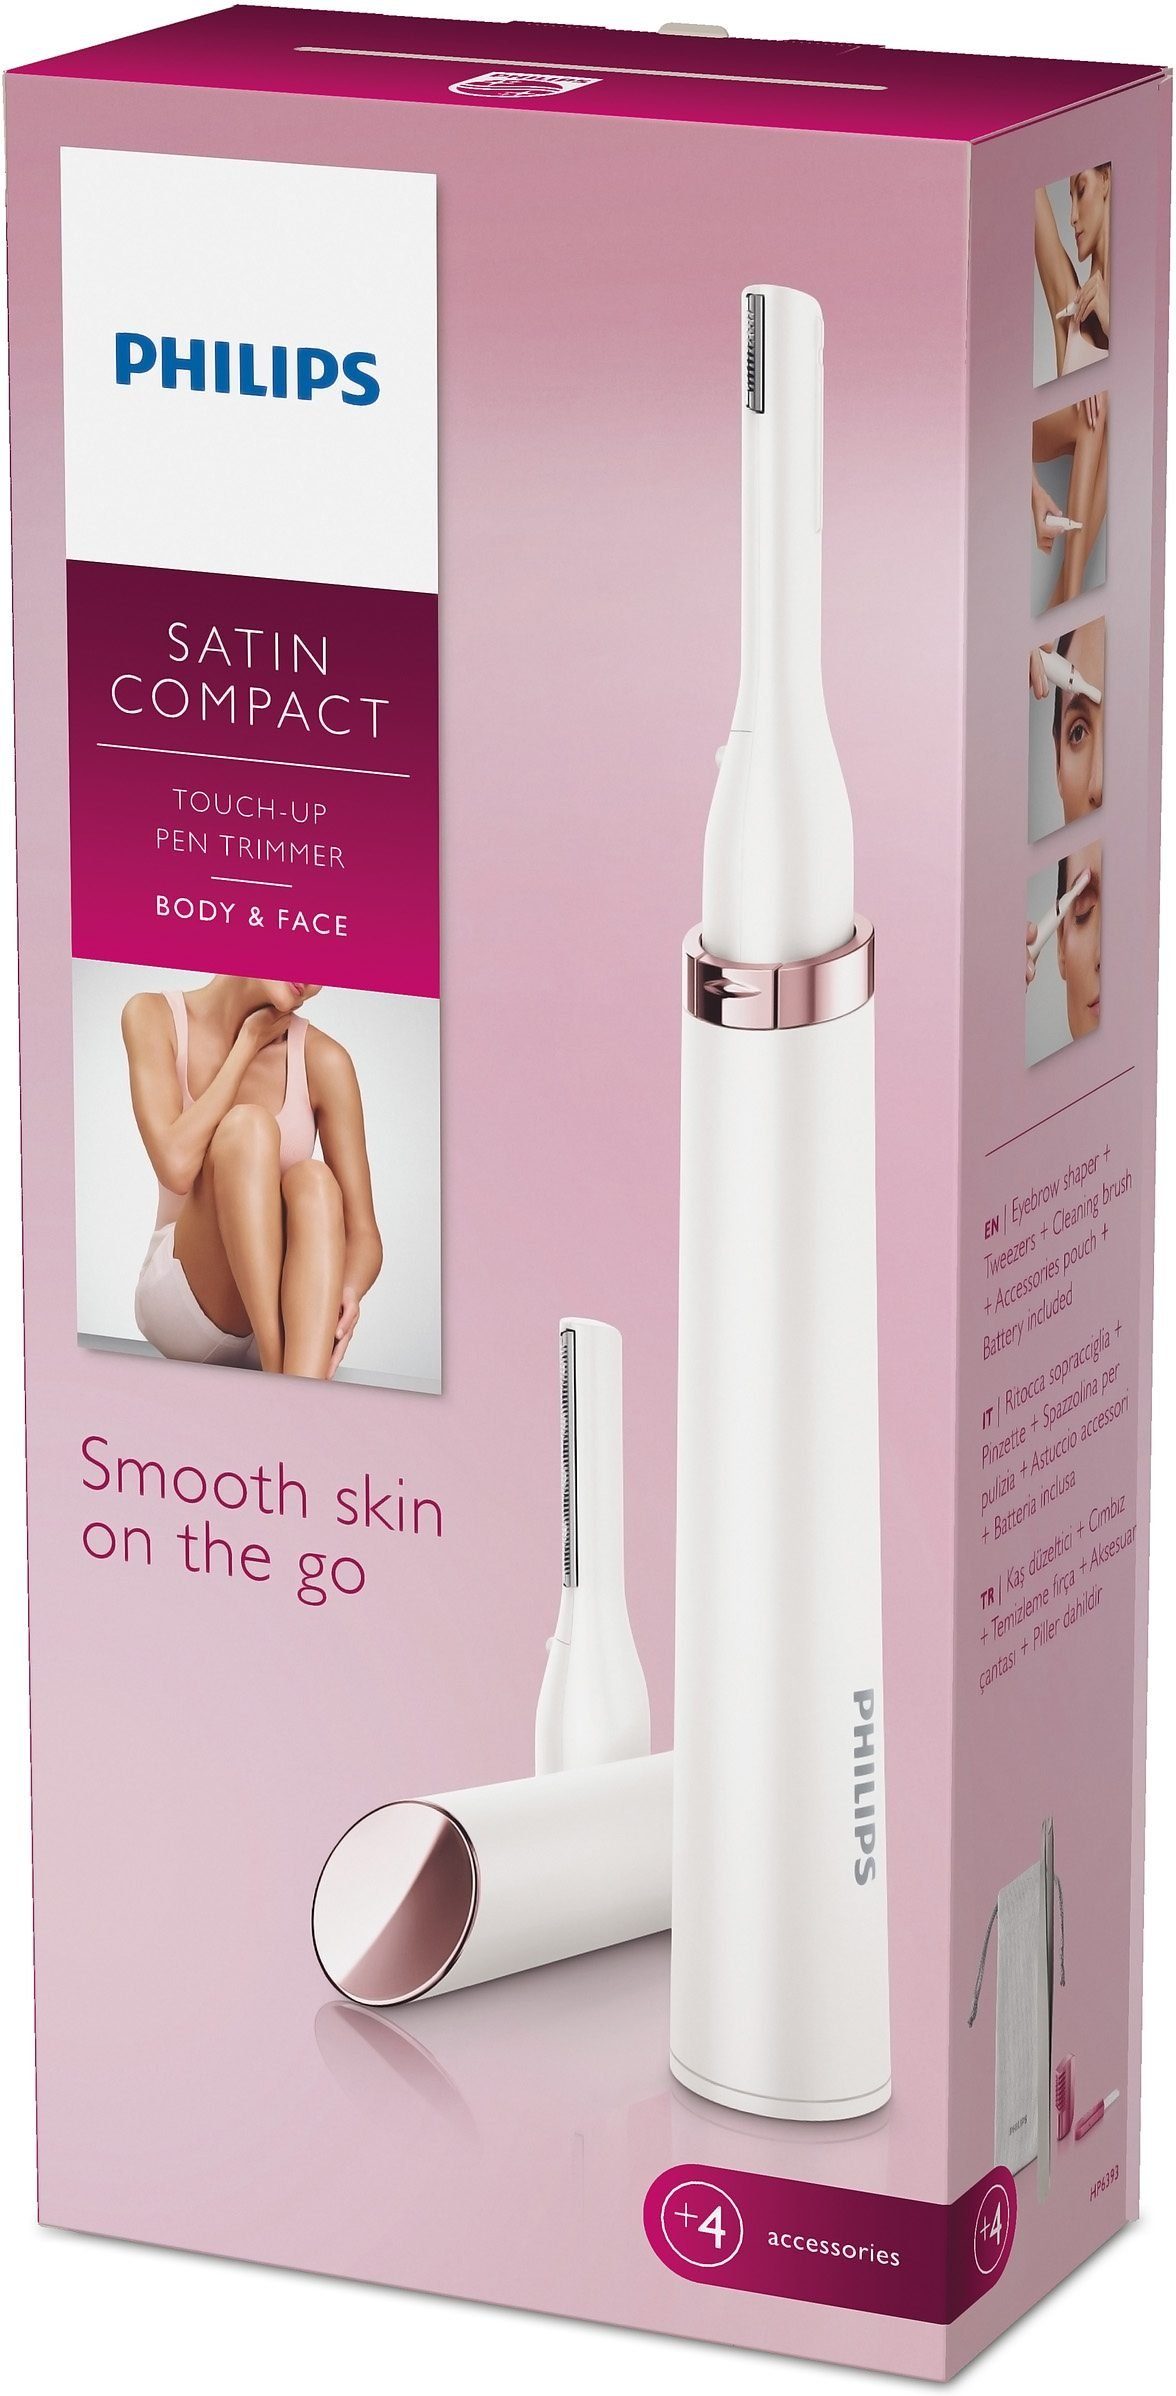 & Face Beauty-Trimmer Satin HP6393/00 Philips Compact Body